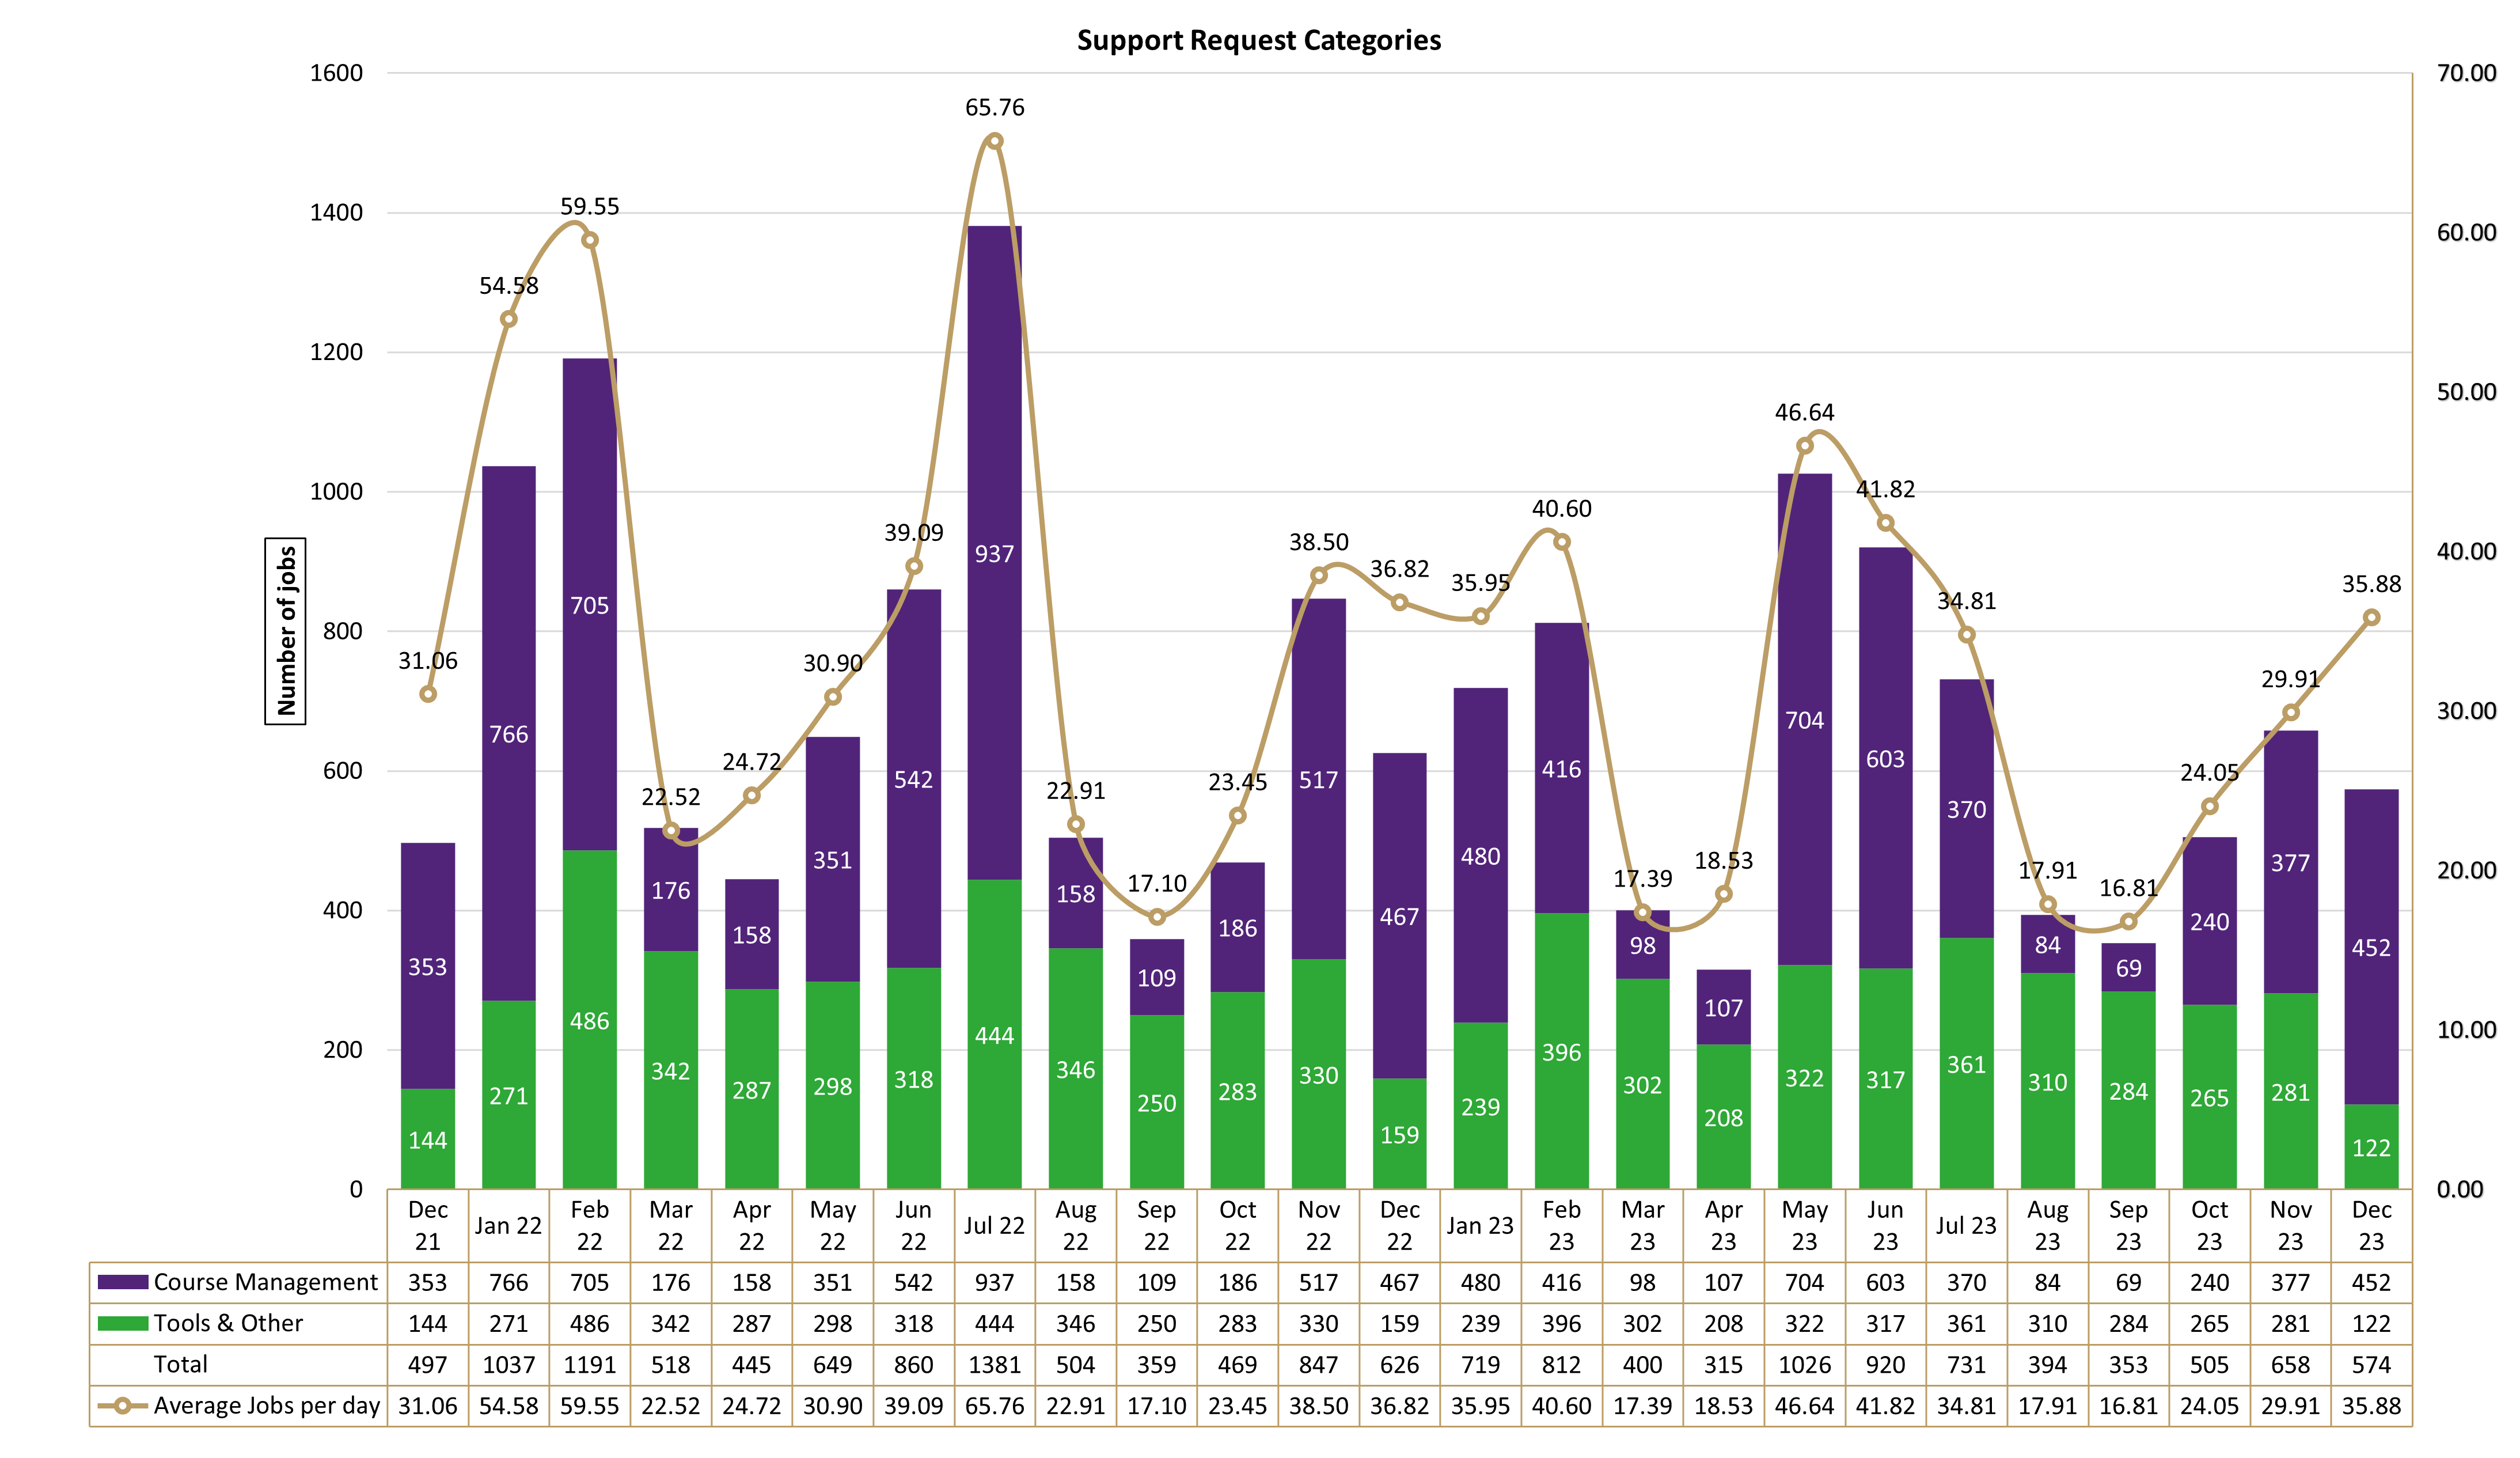 Chart of Support Request Categories from December 2021 to December 2023